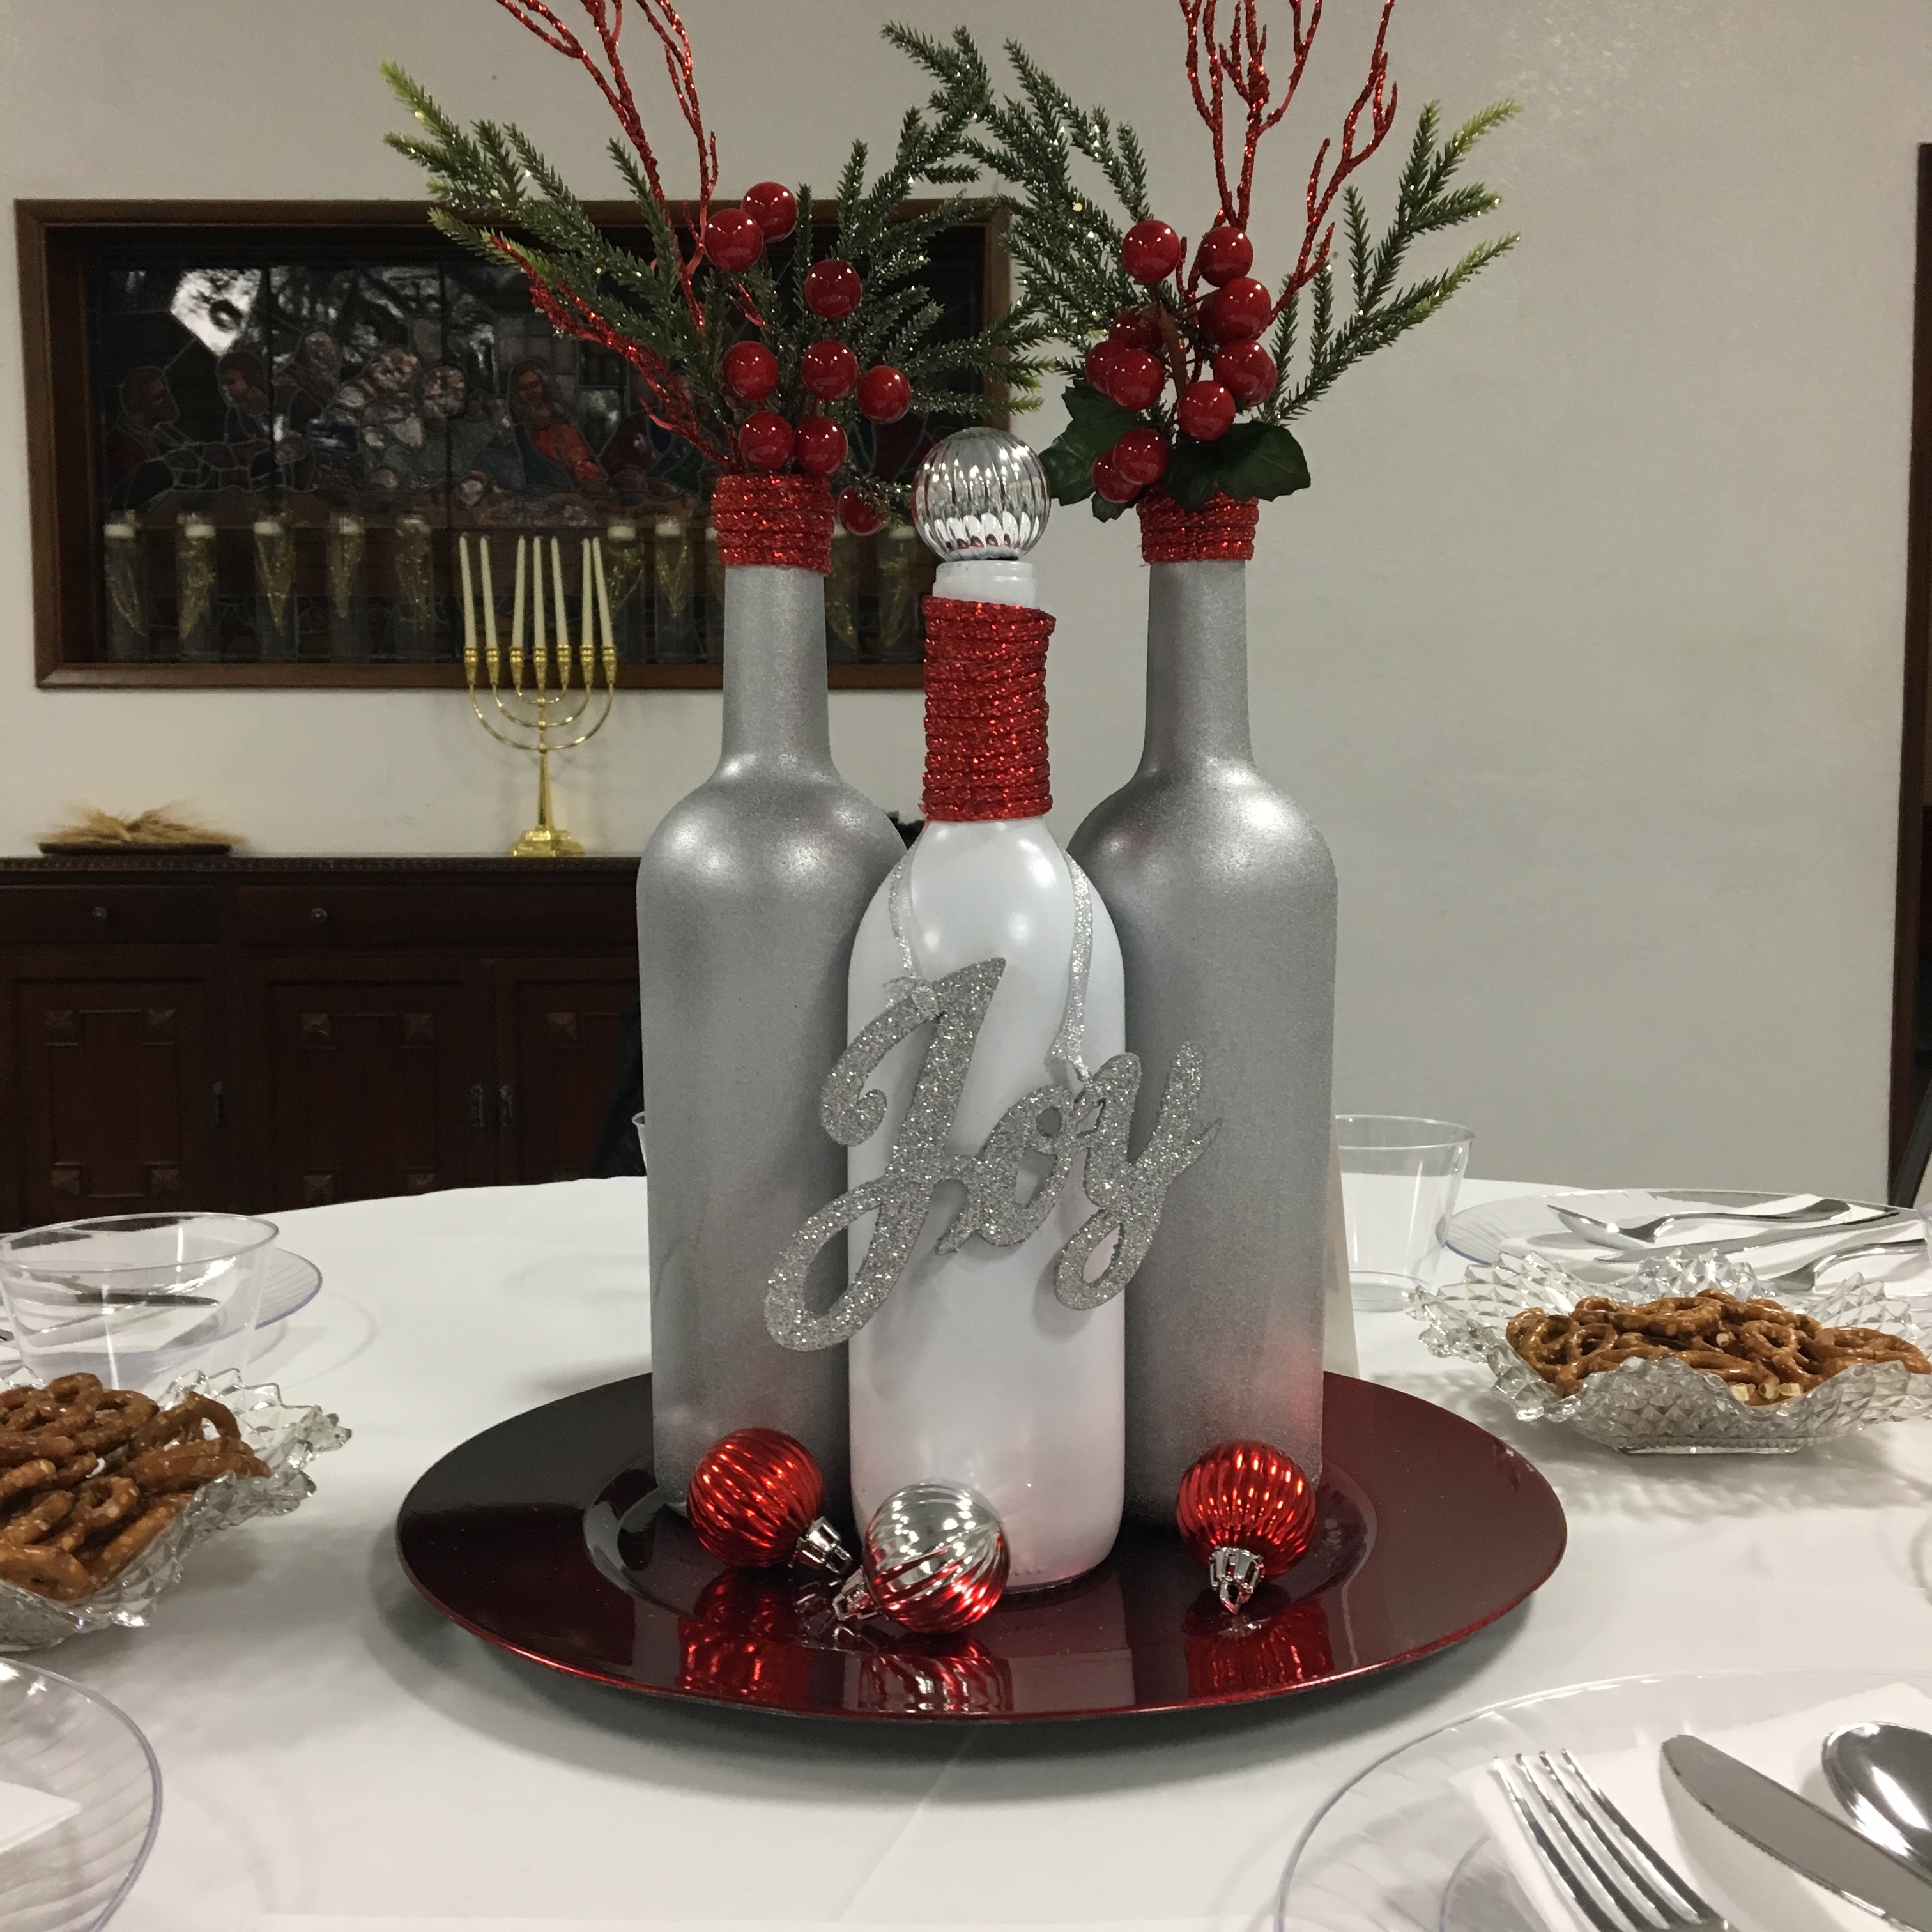 DIY Holiday Crafting with Wine Bottles